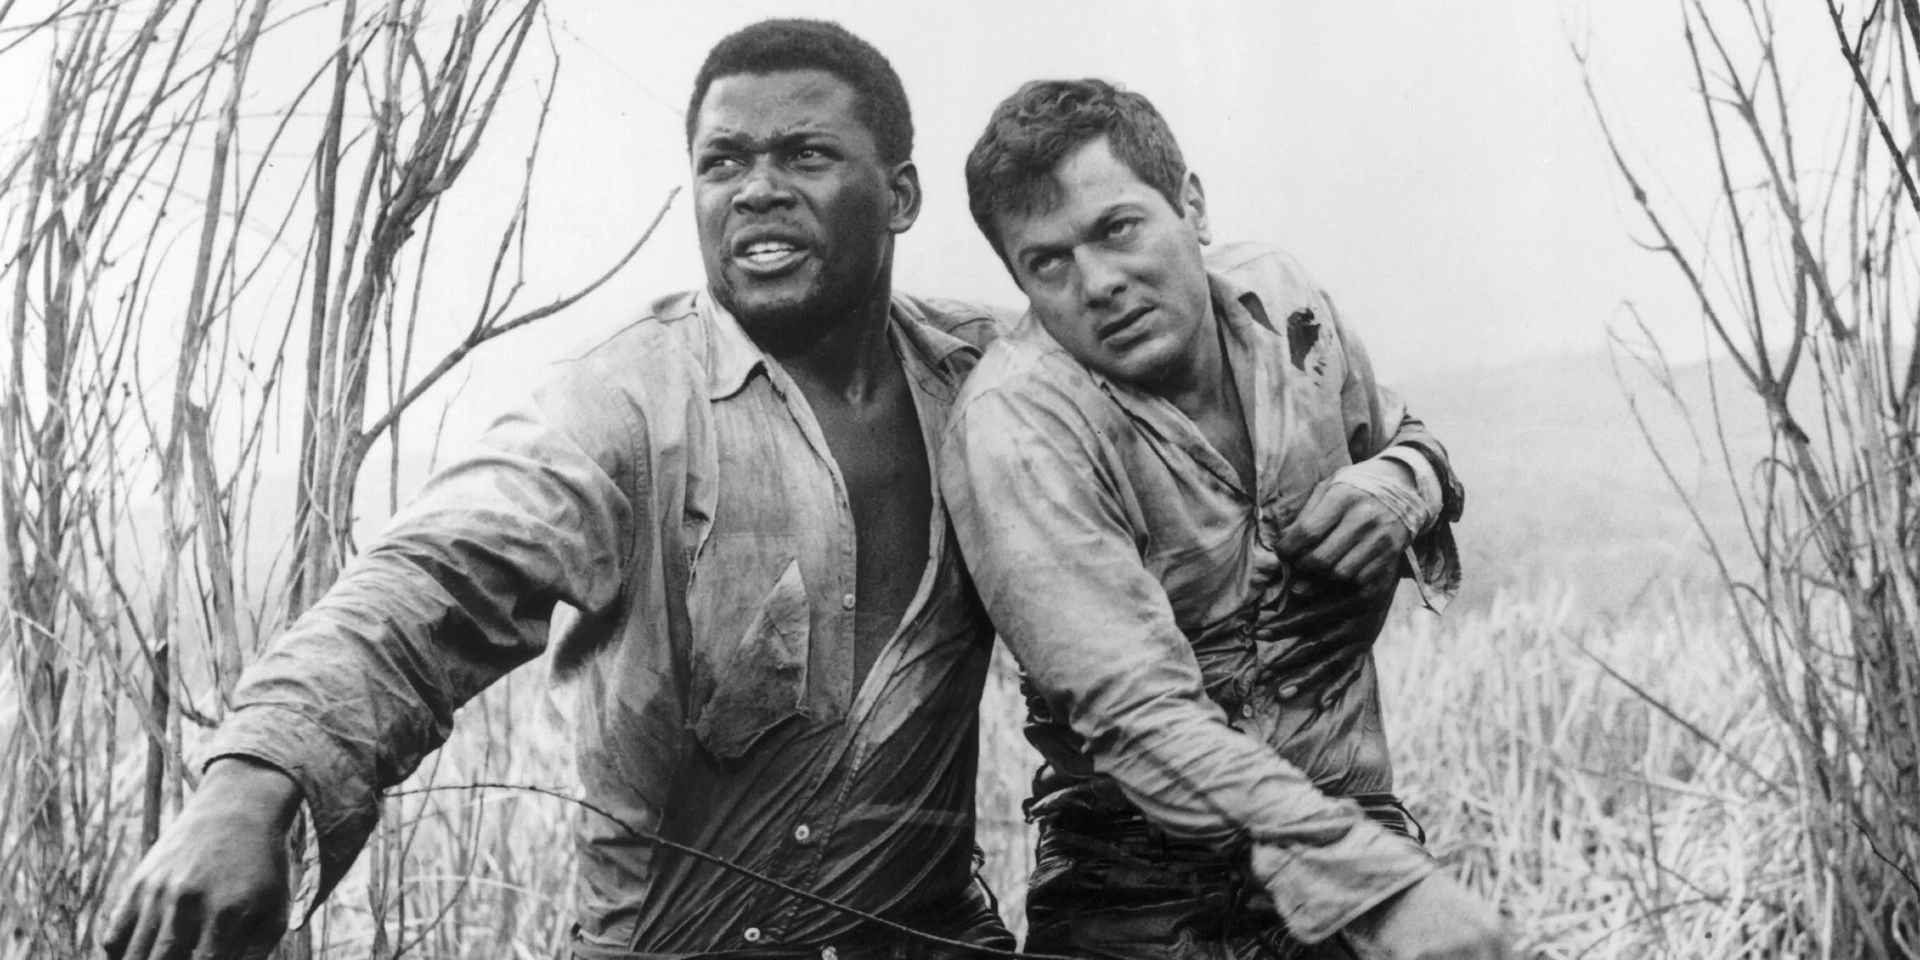 Noah and John on the run in The Defiant Ones.